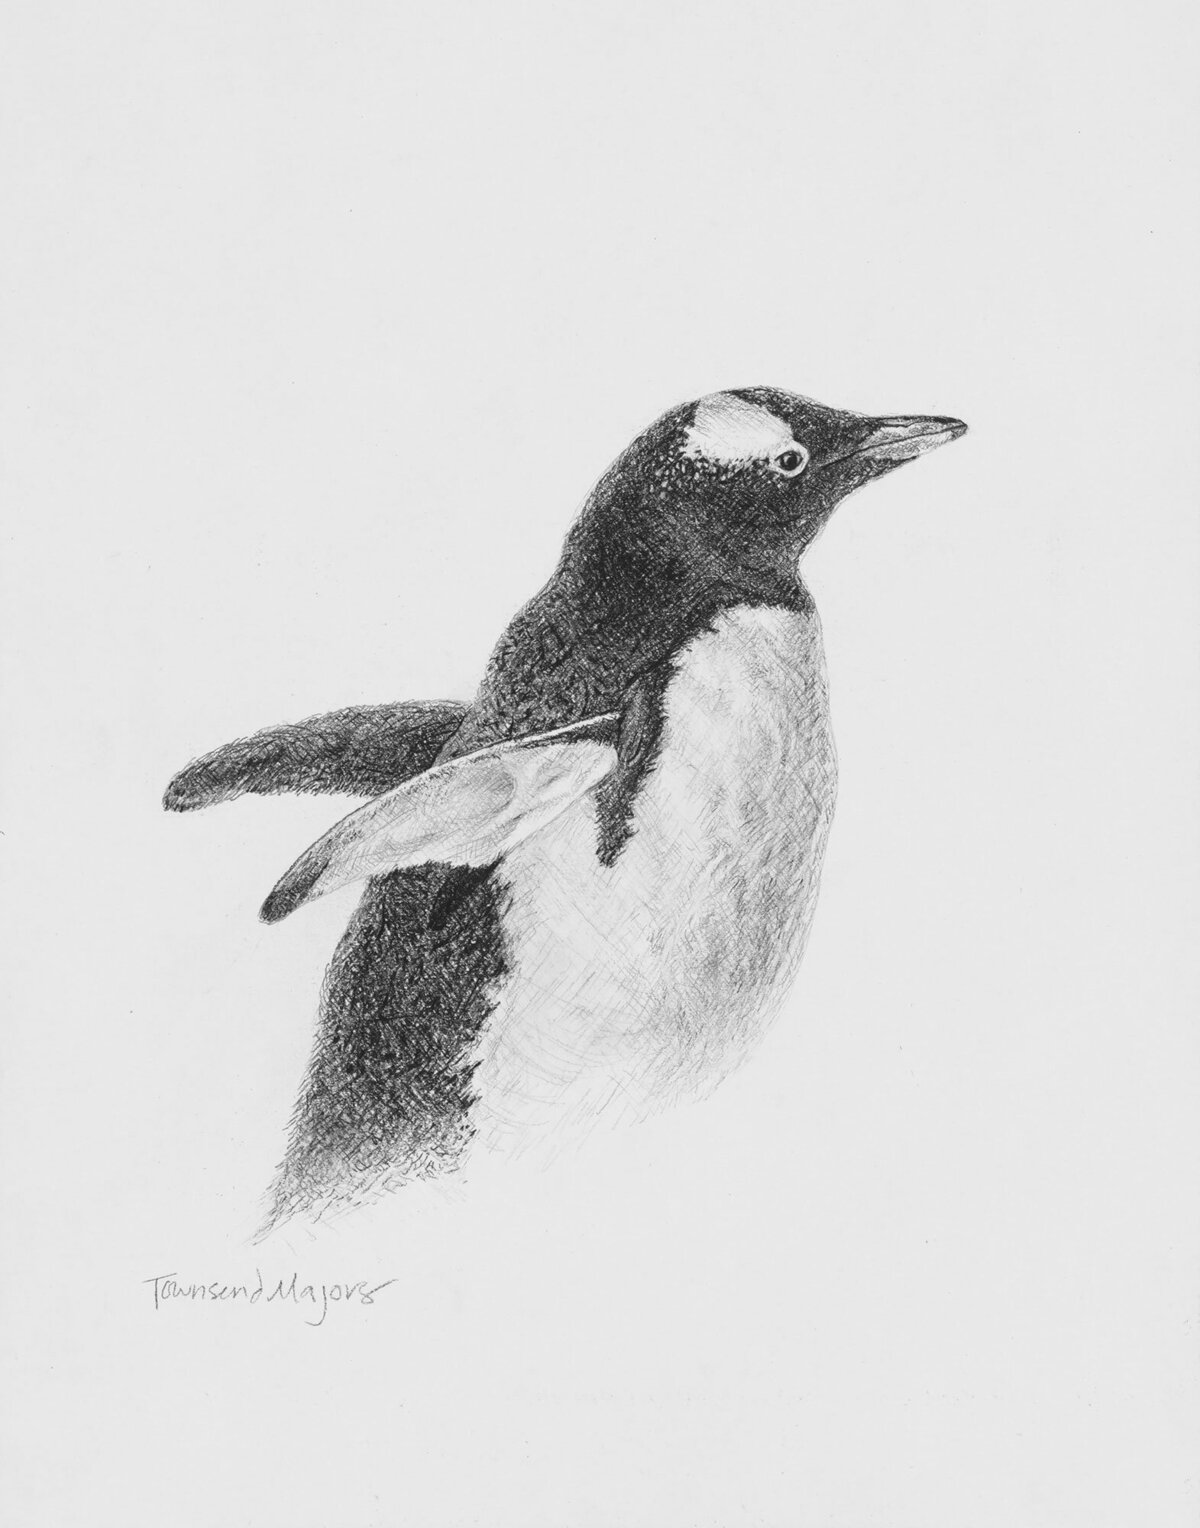 Townsend Majors' graphite drawing of a gentoo penguin